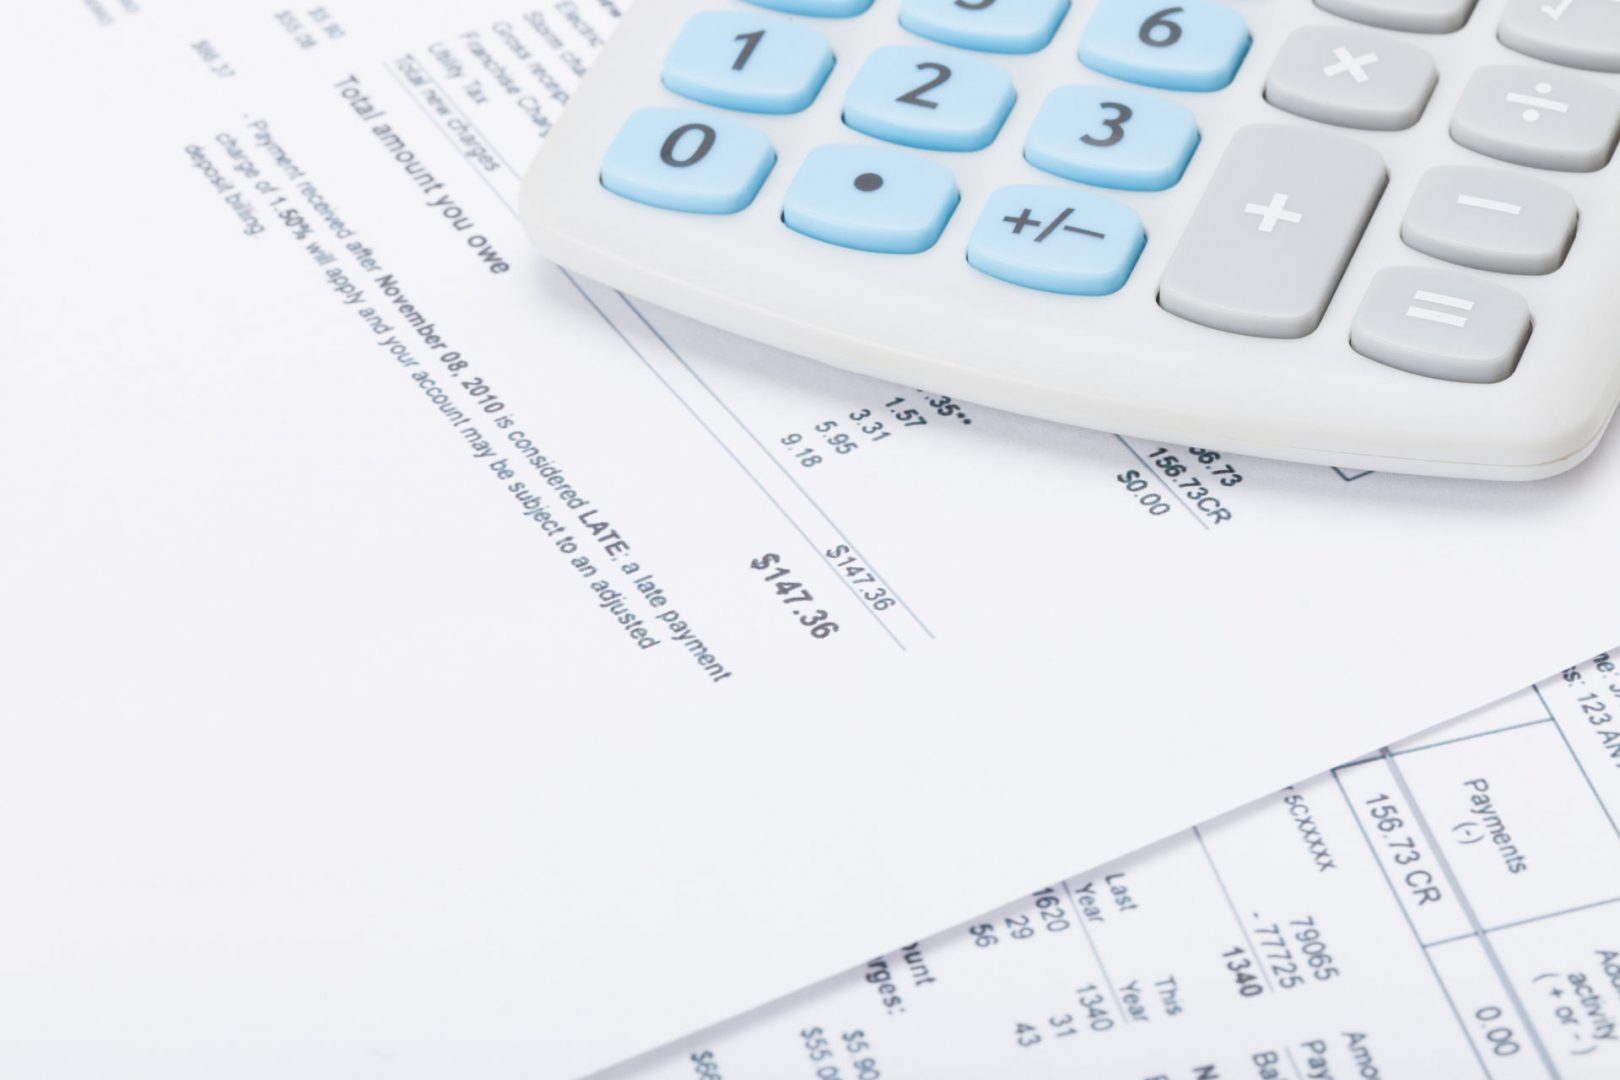 Calculator atop of paper financial statement